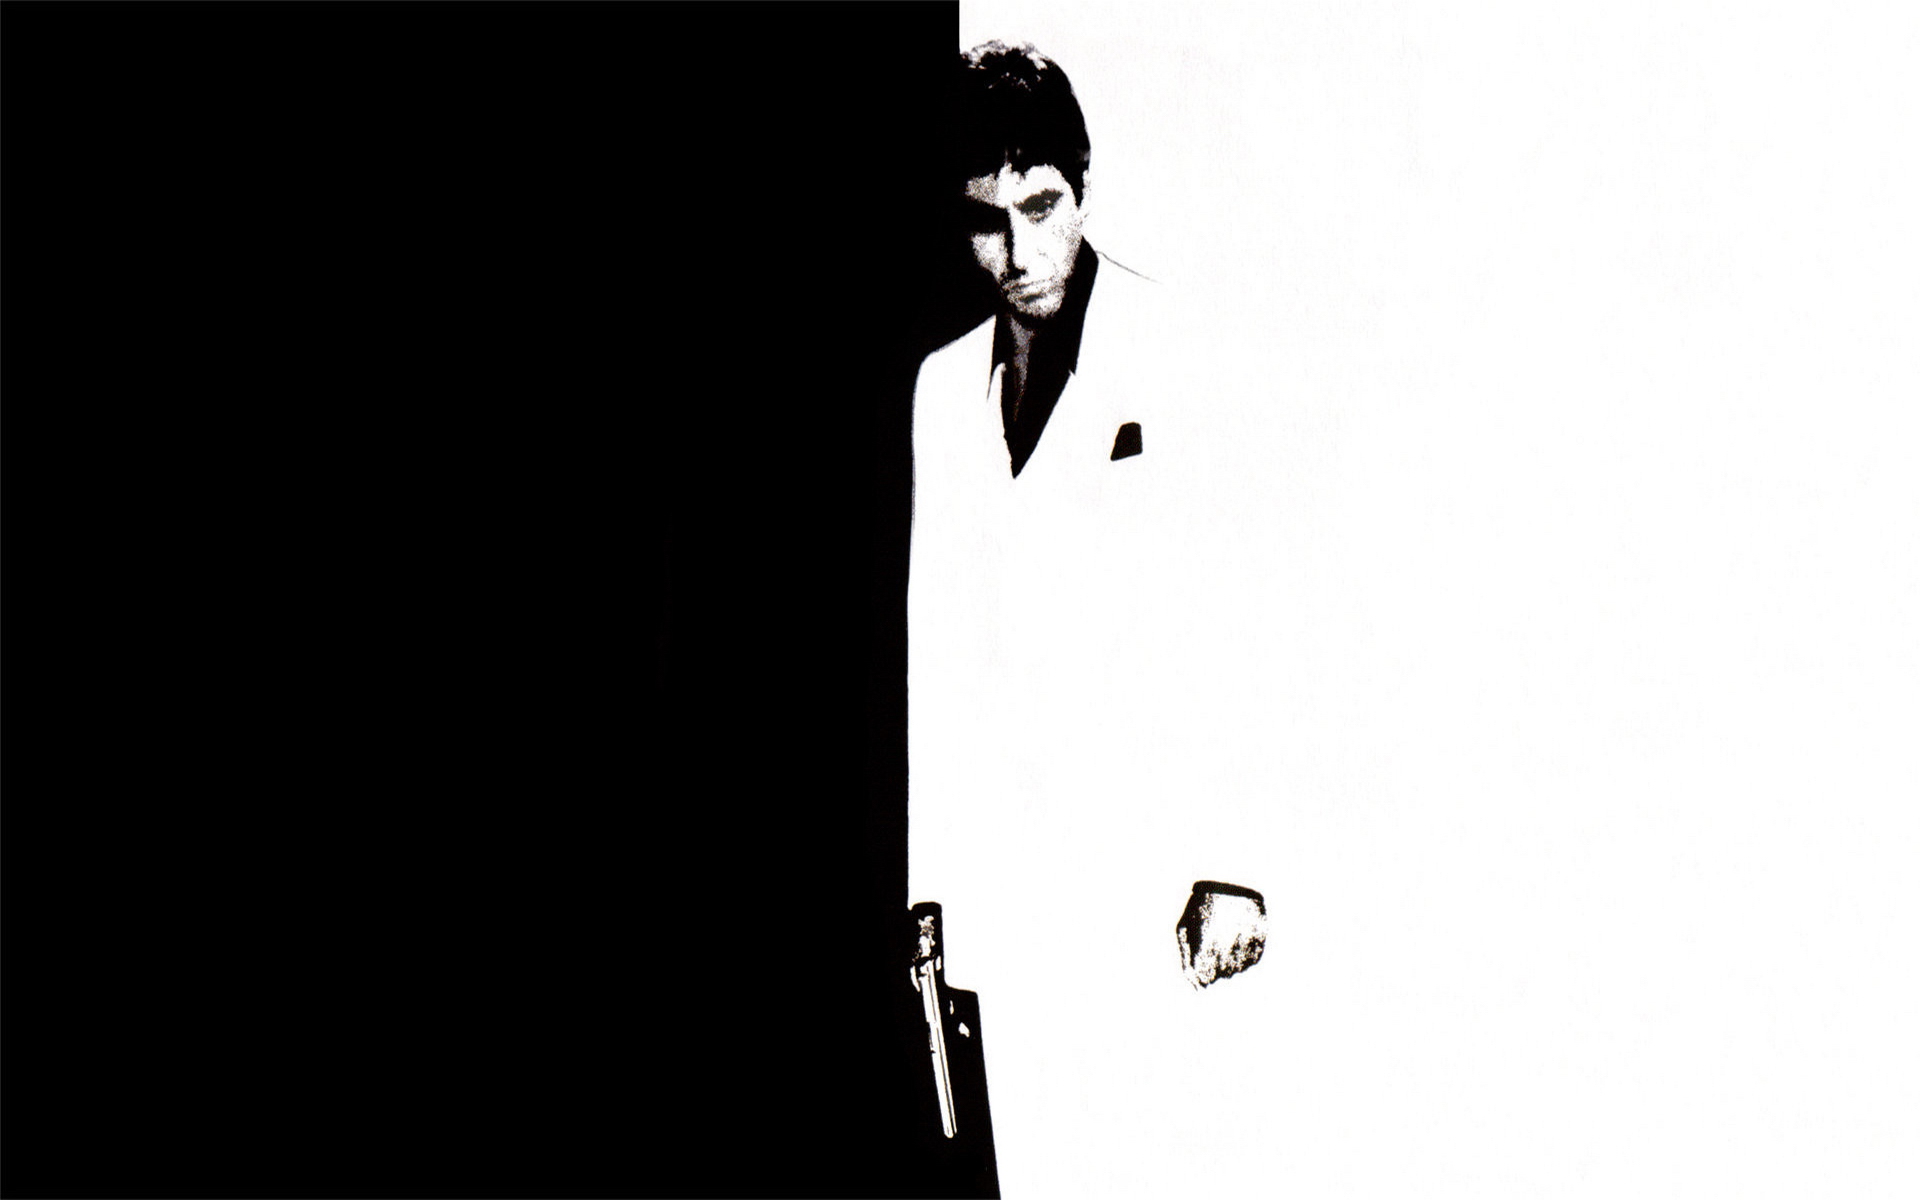 Free download Tony Montana Wallpaper Image Crazy Gallery [1920x1200] for your Desktop, Mobile & Tablet. Explore Tony Montana Wallpaper. Scarface HD Wallpaper, Scarface Wallpaper, Montana Image Wallpaper